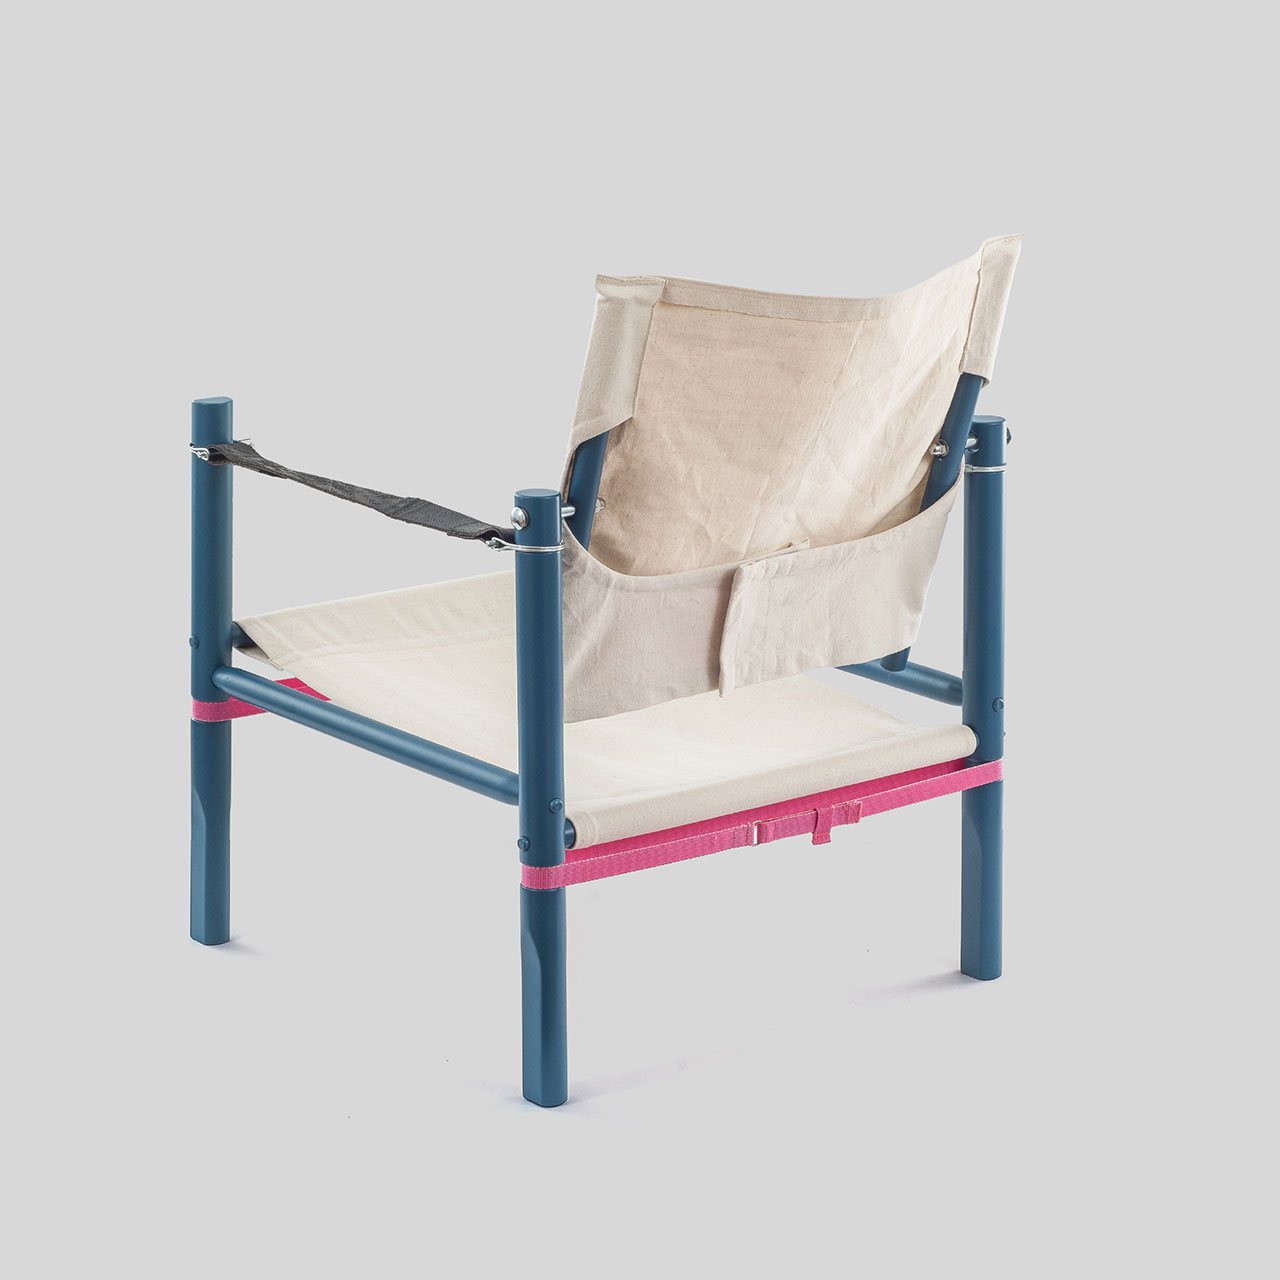 The RSC armchair by Cristina Vallejo for ELSUR, A reinterpretation of the Roorkhee chair, created during the 19th-century to be used by the British Army campaigns in India.
20/21 SELECTION. Palazzo Valli Bruni.